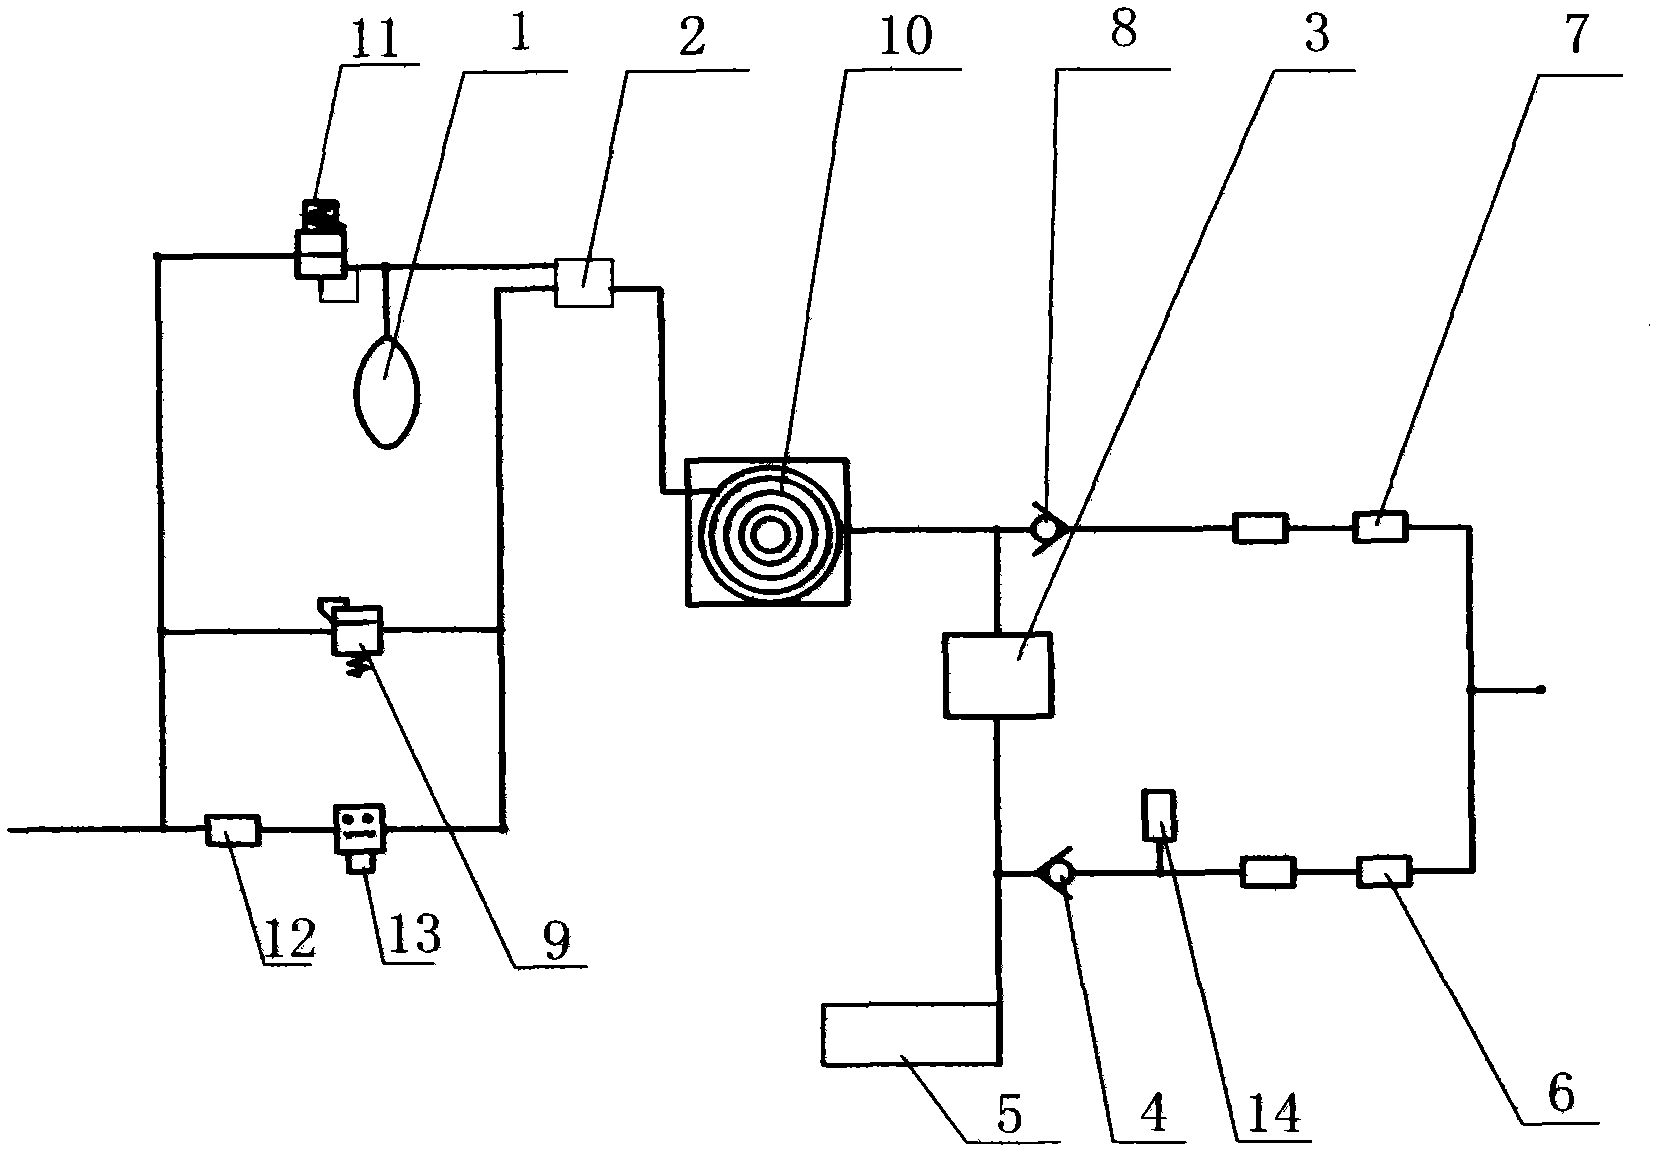 Gas circuit structure for anesthesia respirator